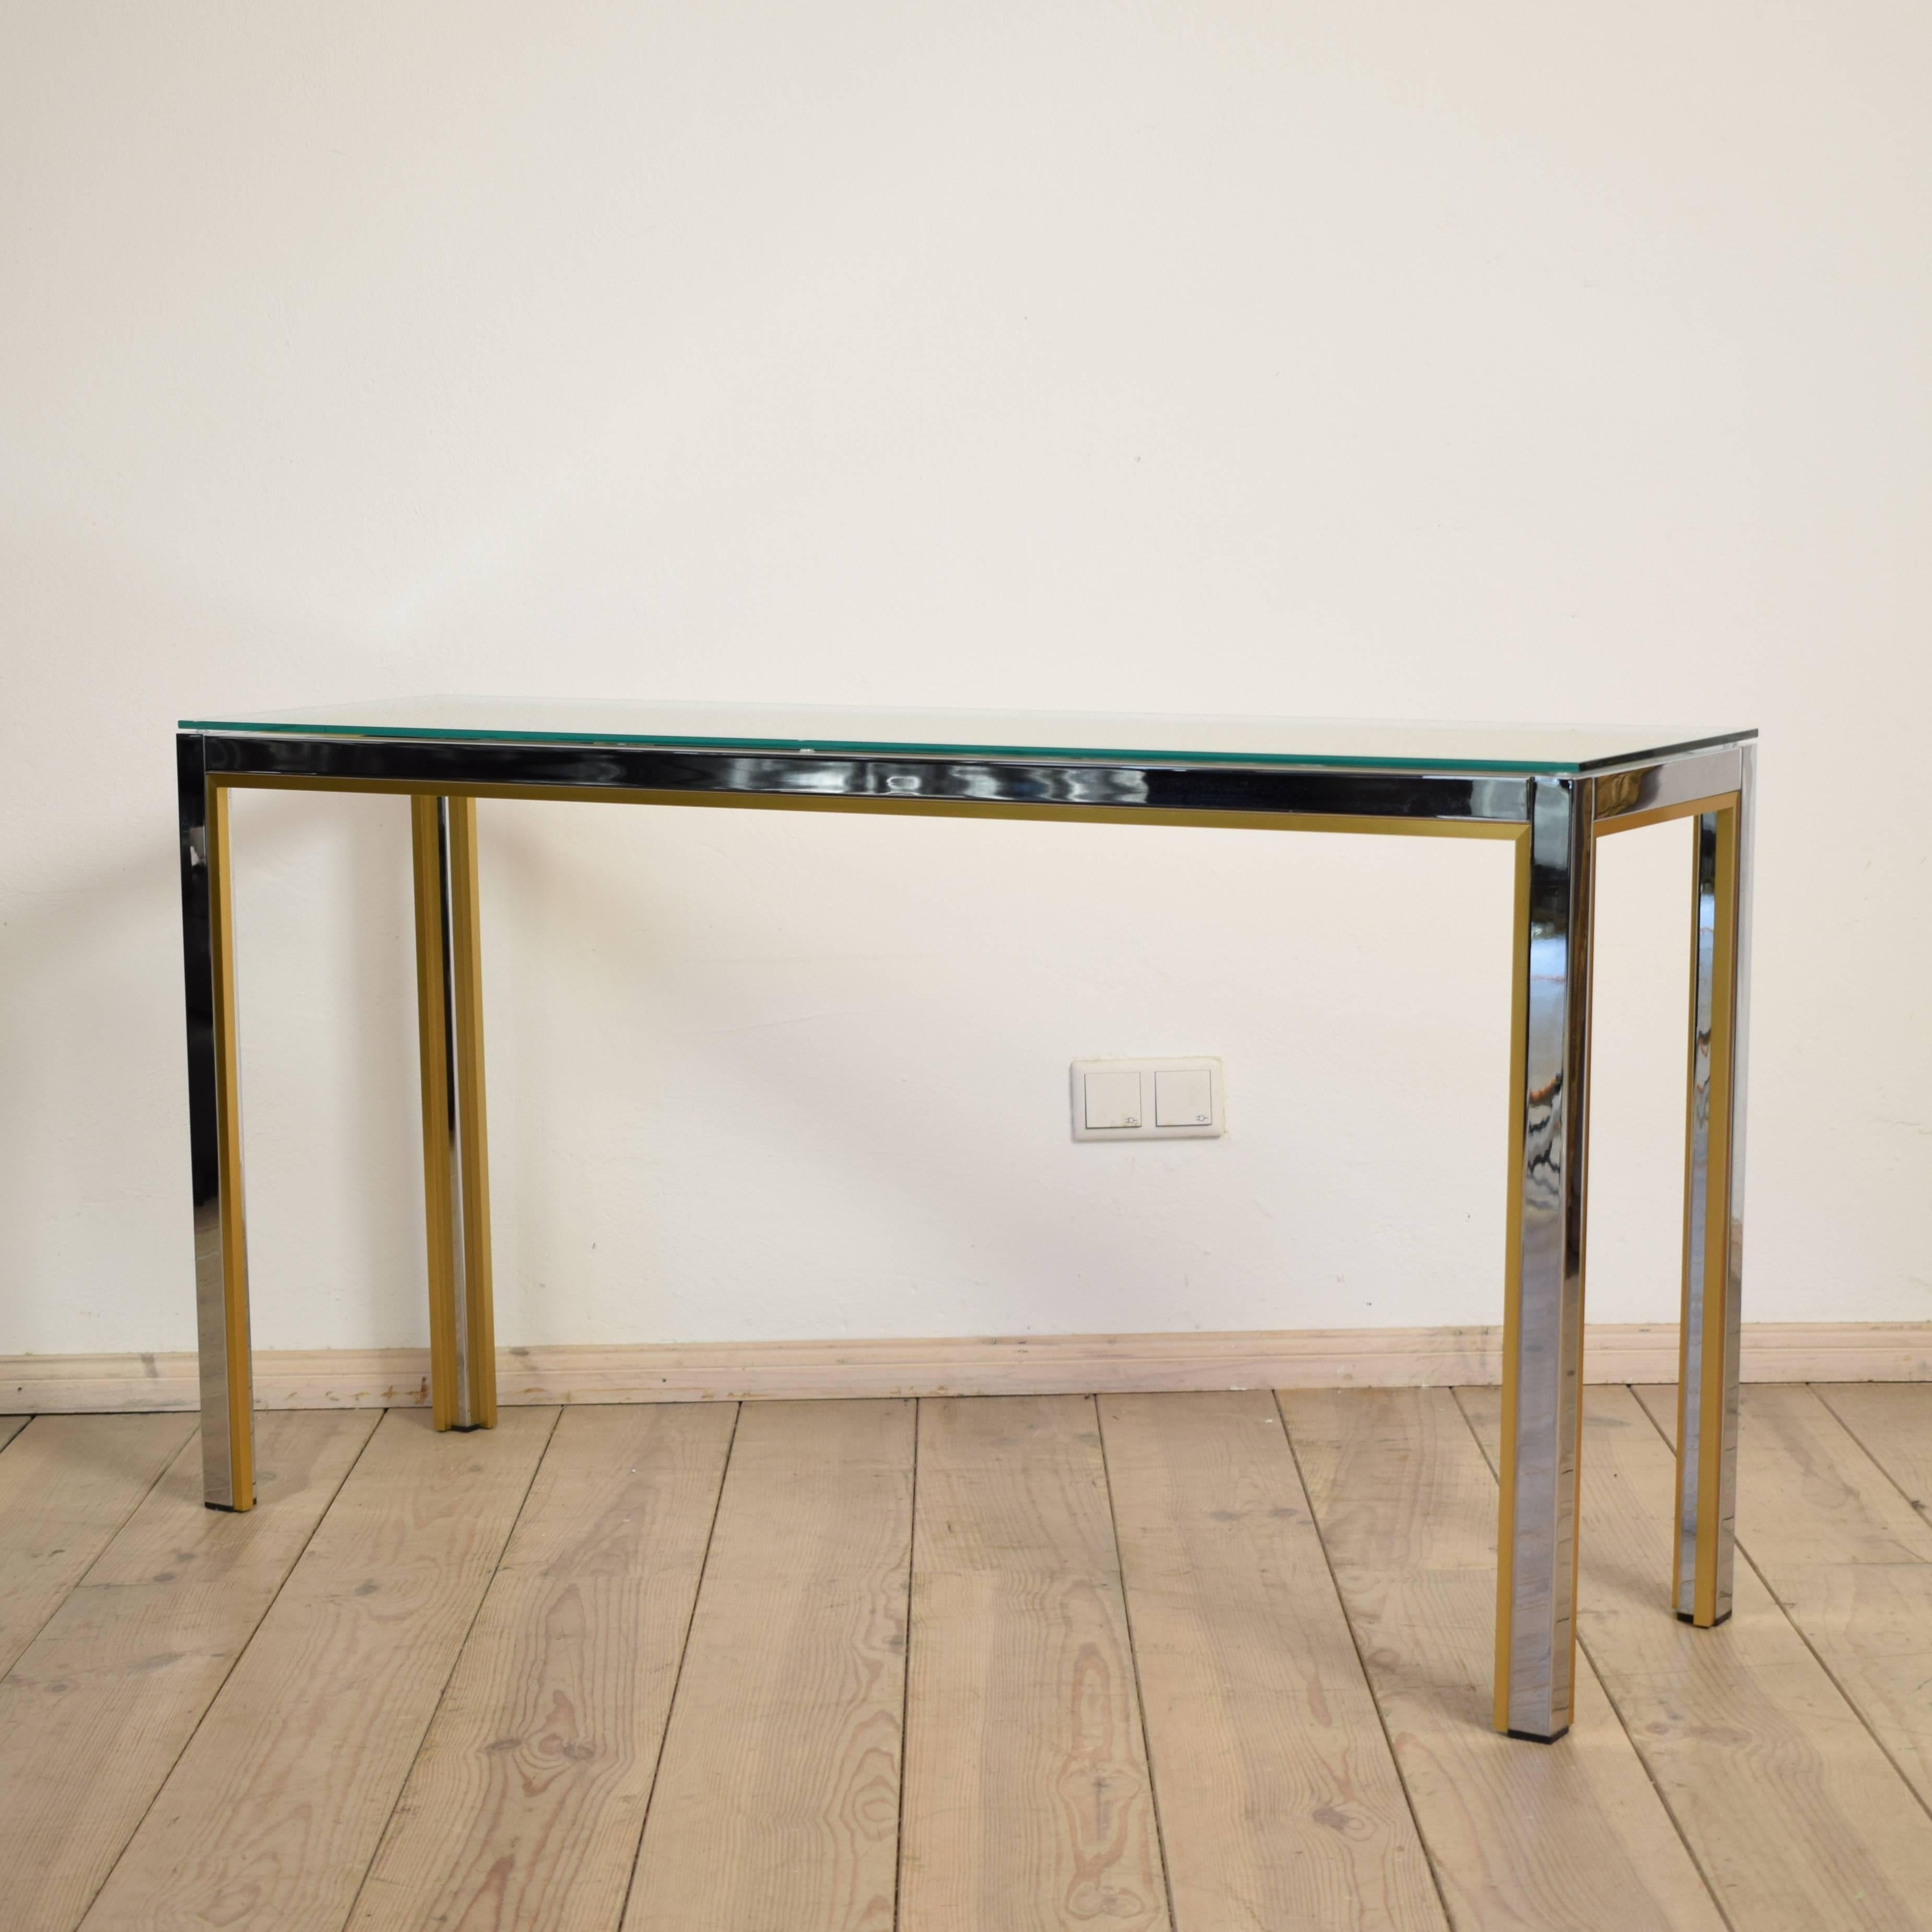 This brass and chrome console table by Renato Zevi was produced by Romeo Rega in the 1970s. A decorative piece that fits in both modern and antique interiors.